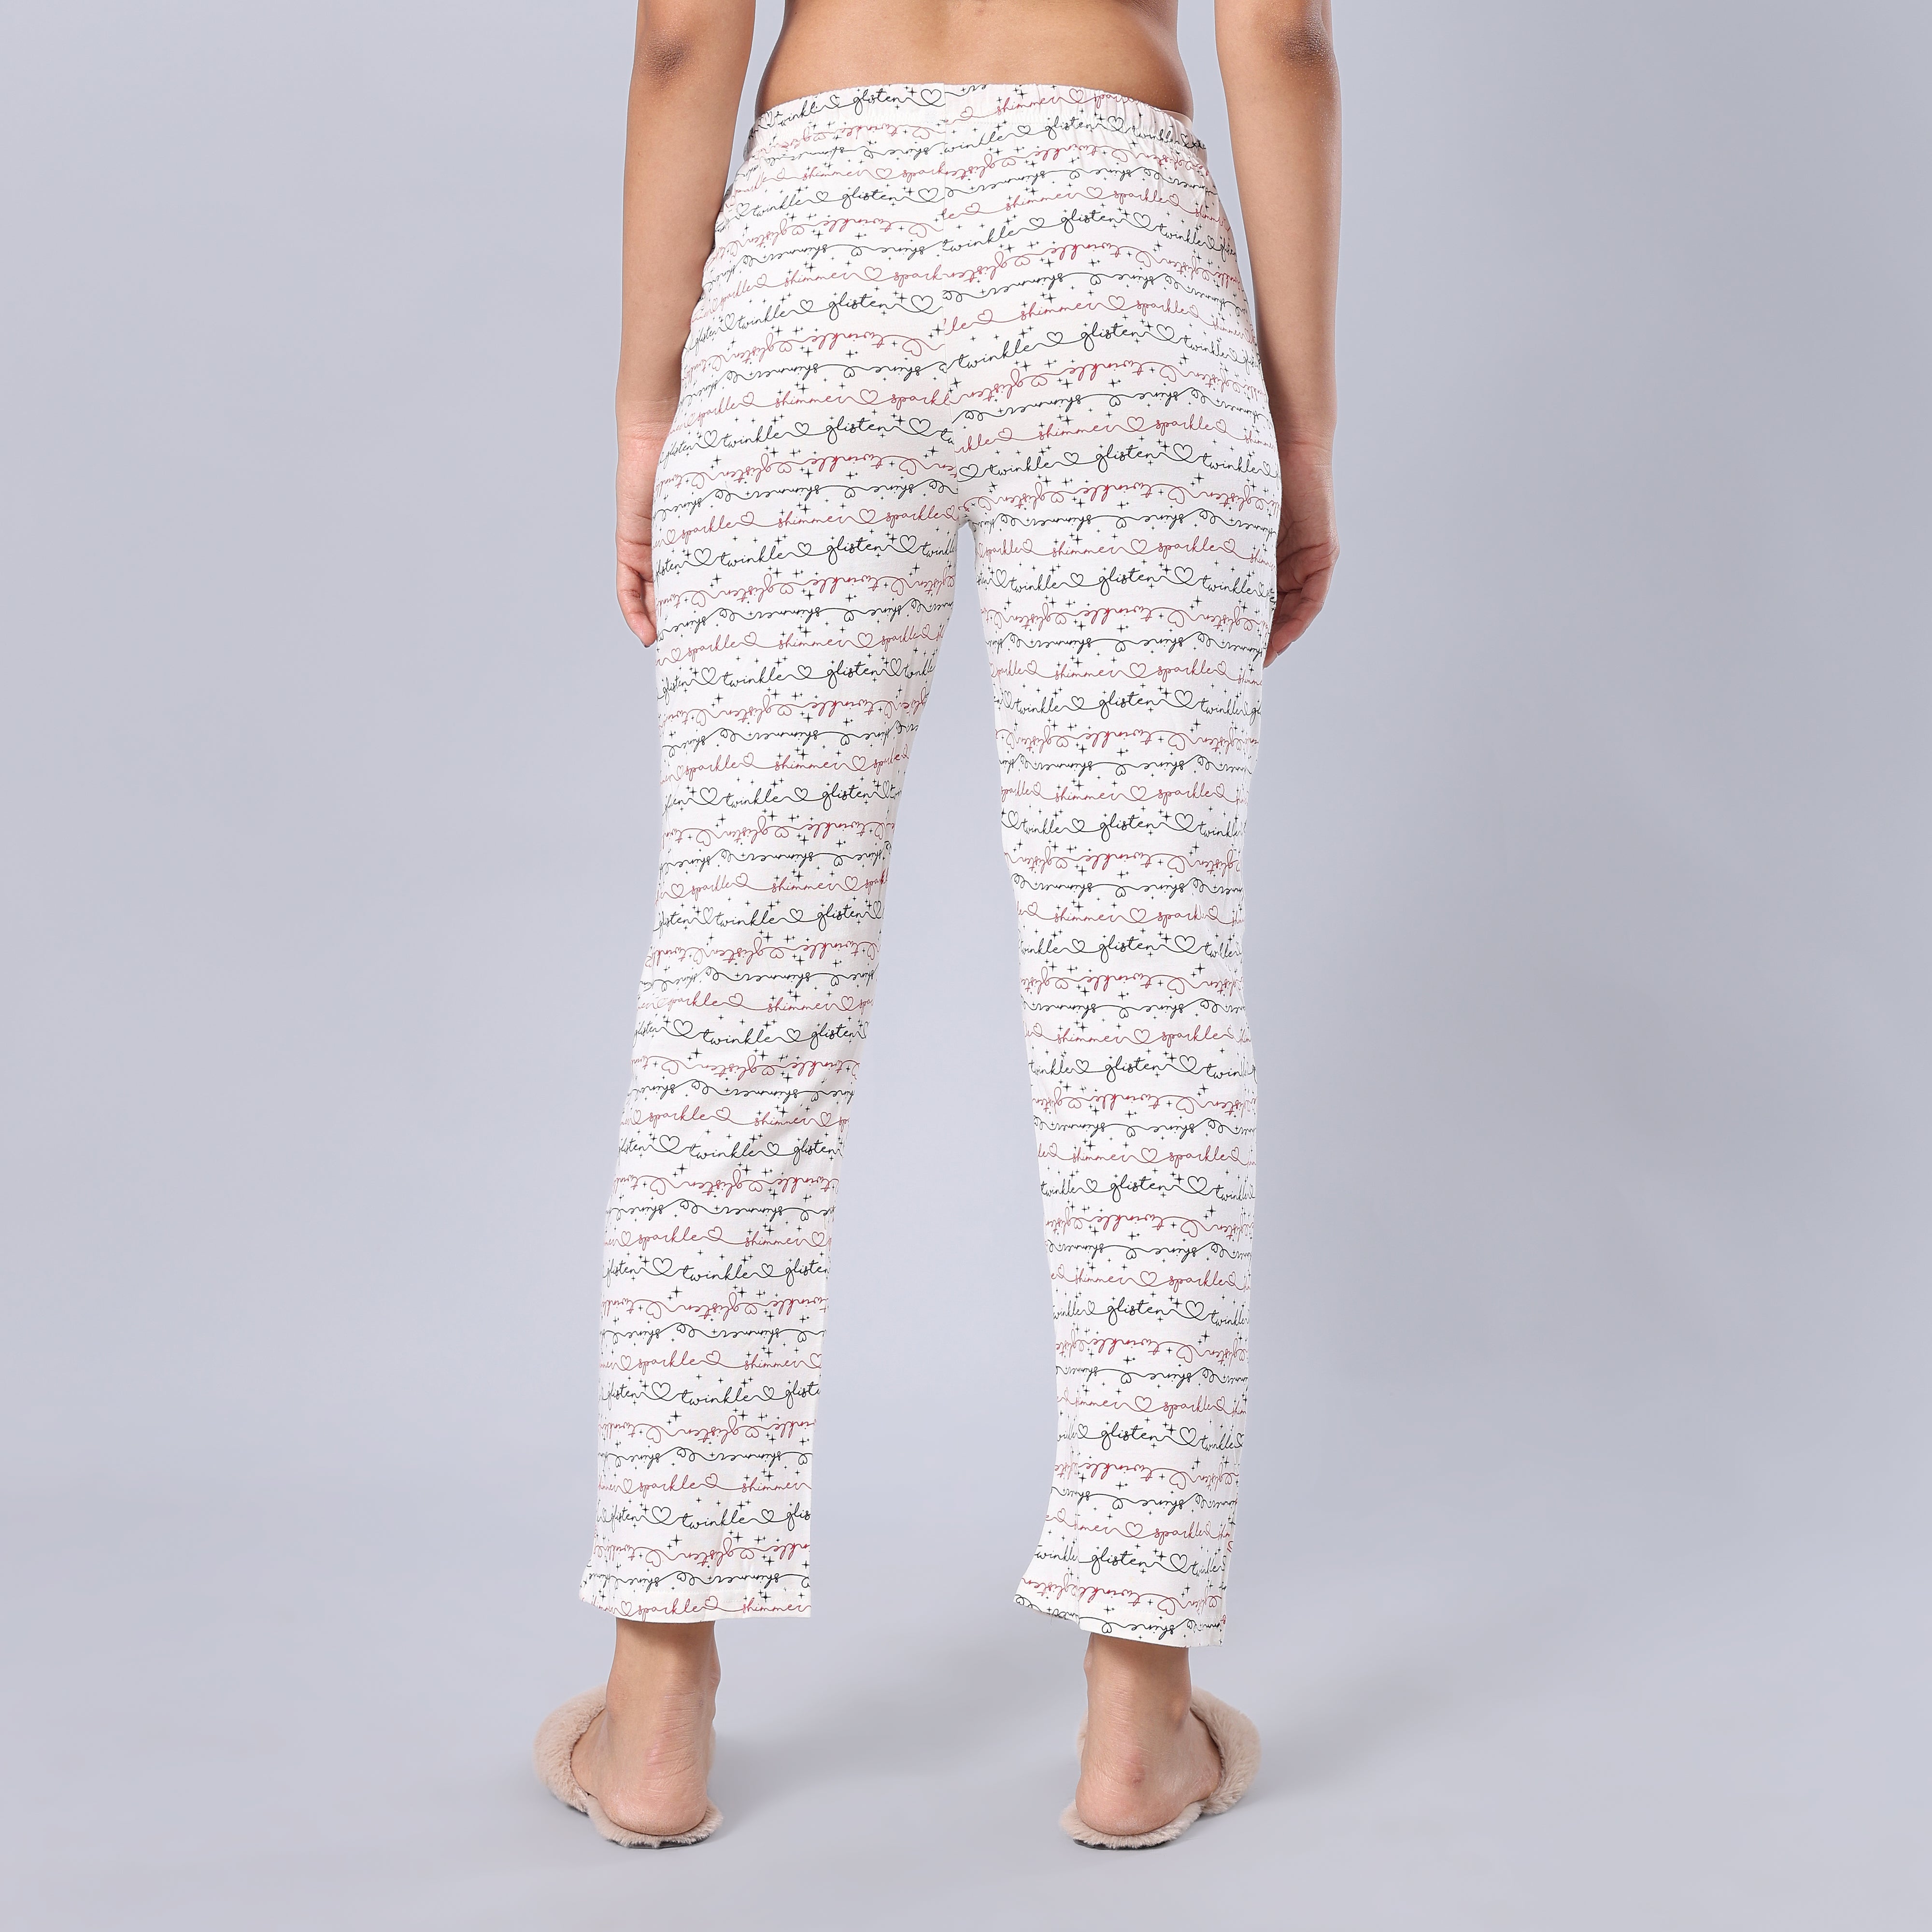 Evolove Women's Super Soft Comfortable Cotton Printed Pyjama Relaxed Lounge Pants with Pockets